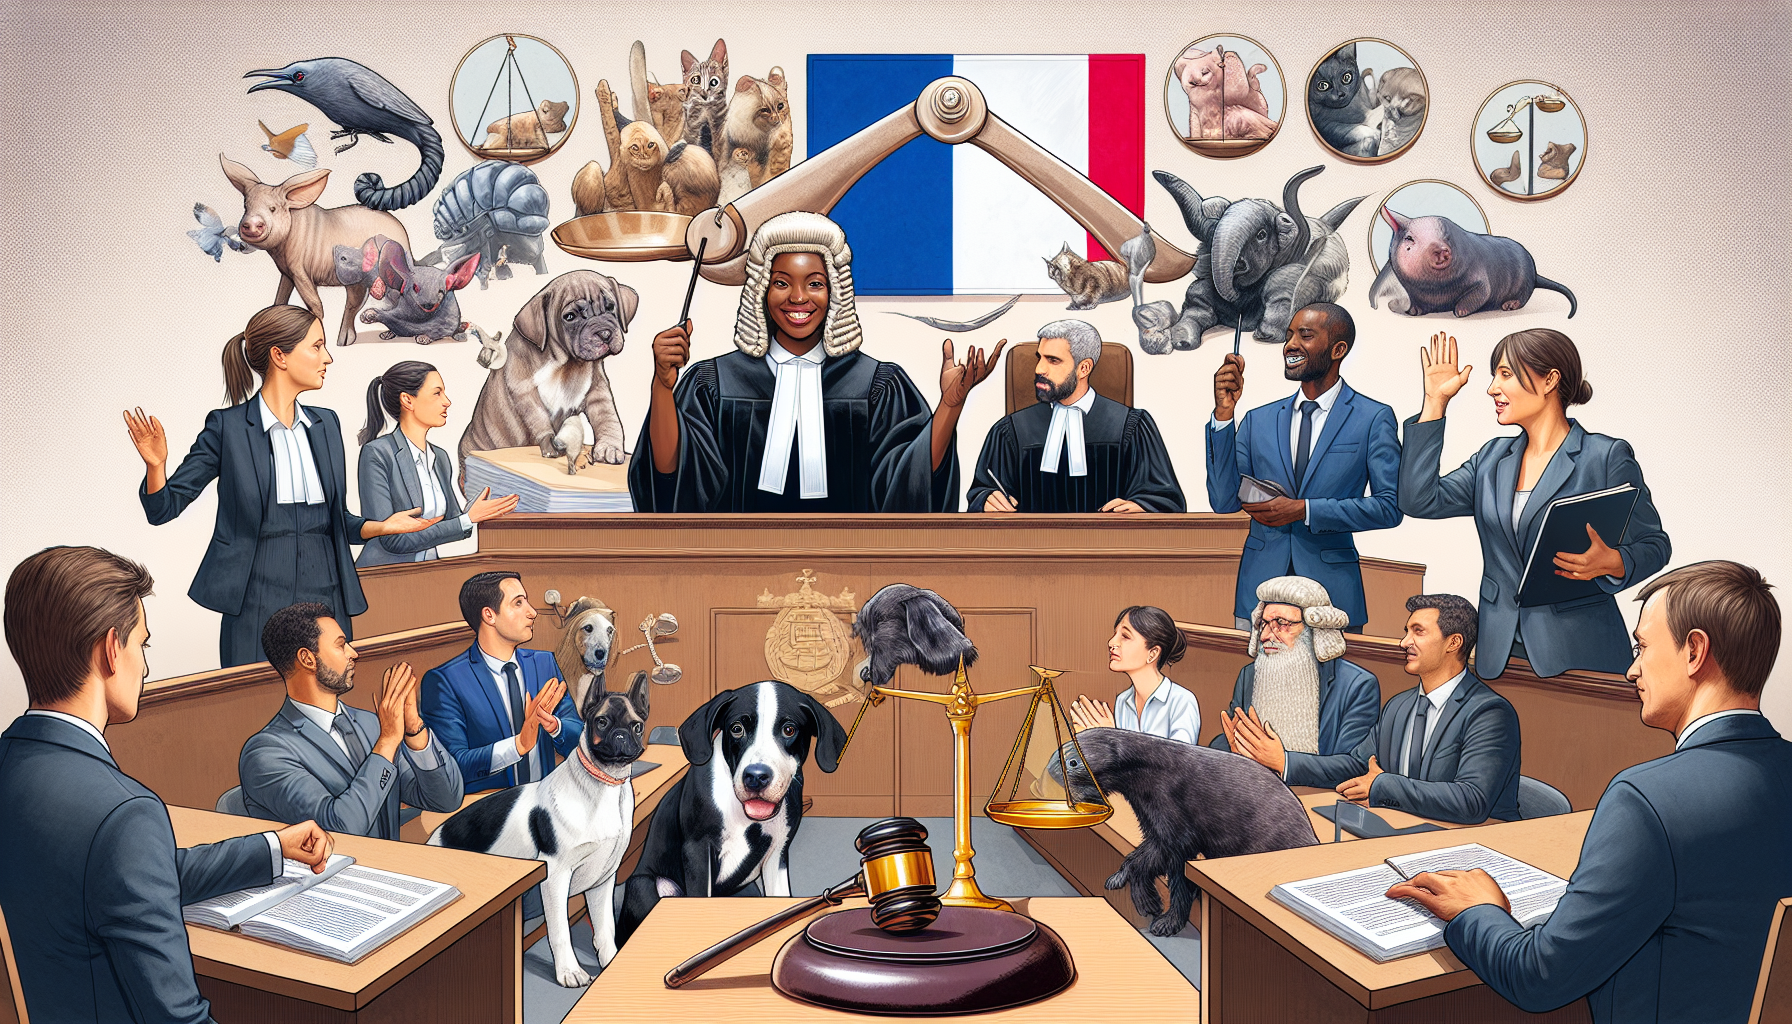 Advancements and challenges in animal rights legislation in France